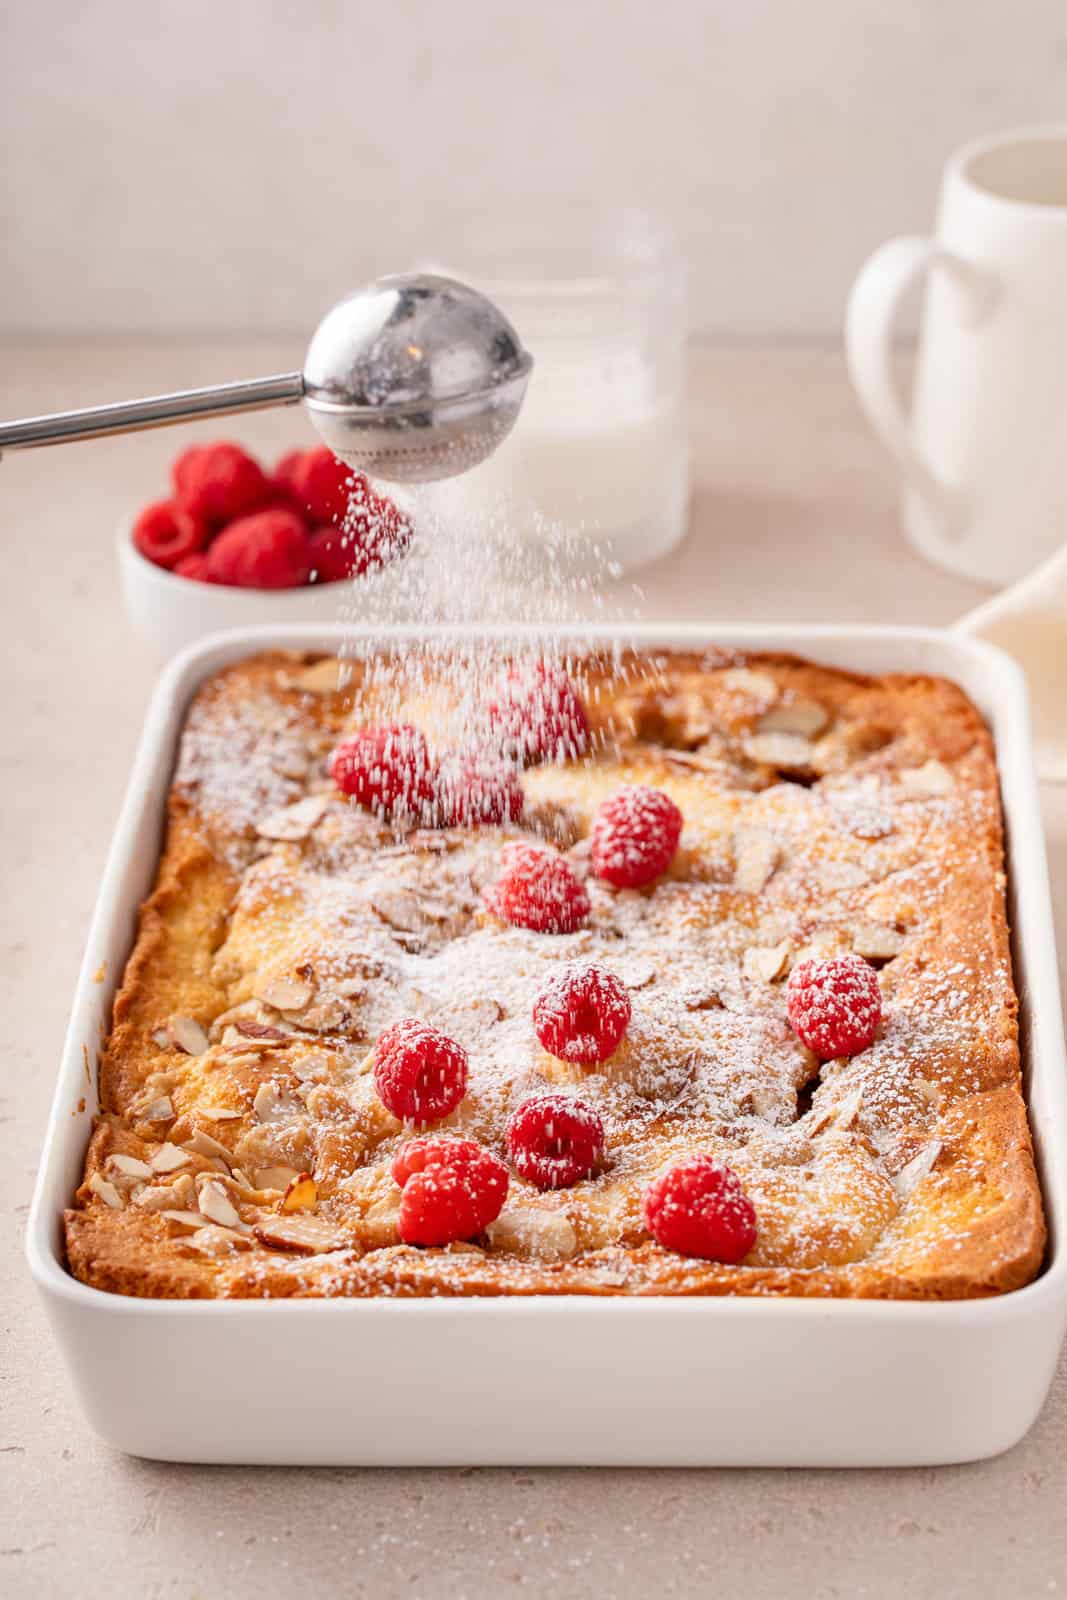 Powdered sugar being dusted over the top of a cooled raspberry coffee cake.